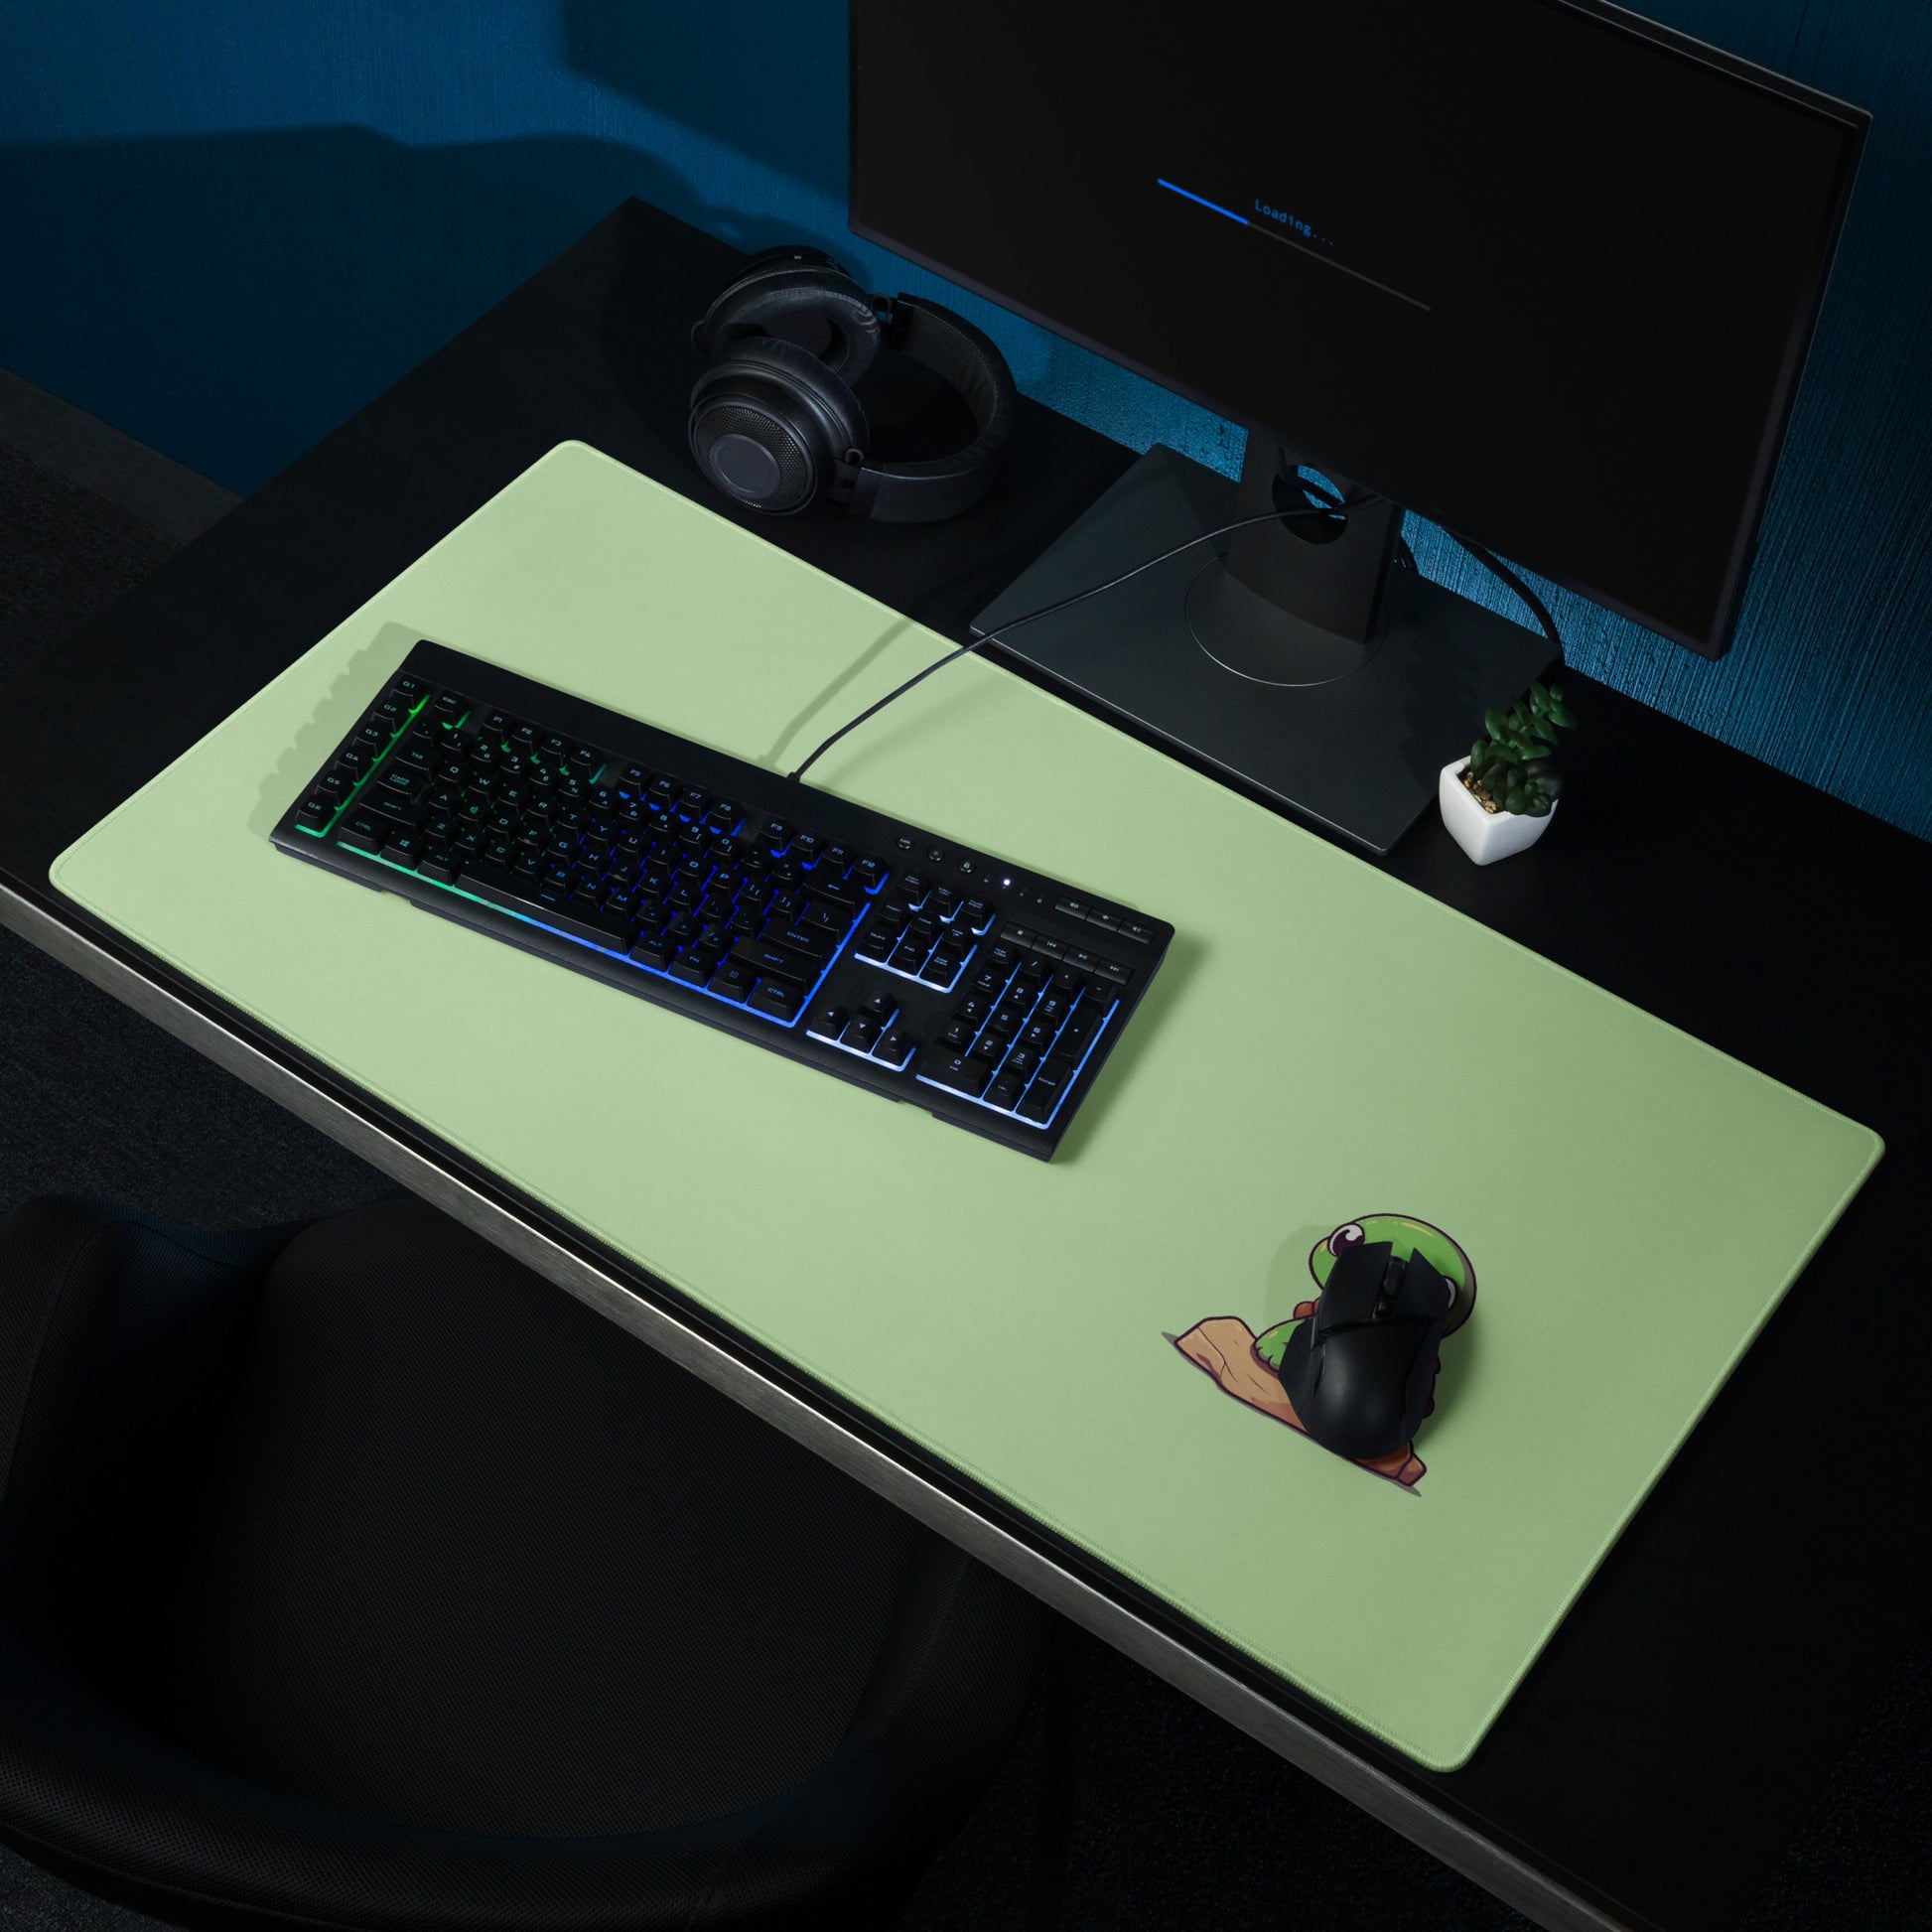 A 36" x 18" desk pad with a picture of a cute turtle sitting on a rock shown on a desk setup. Green in color.